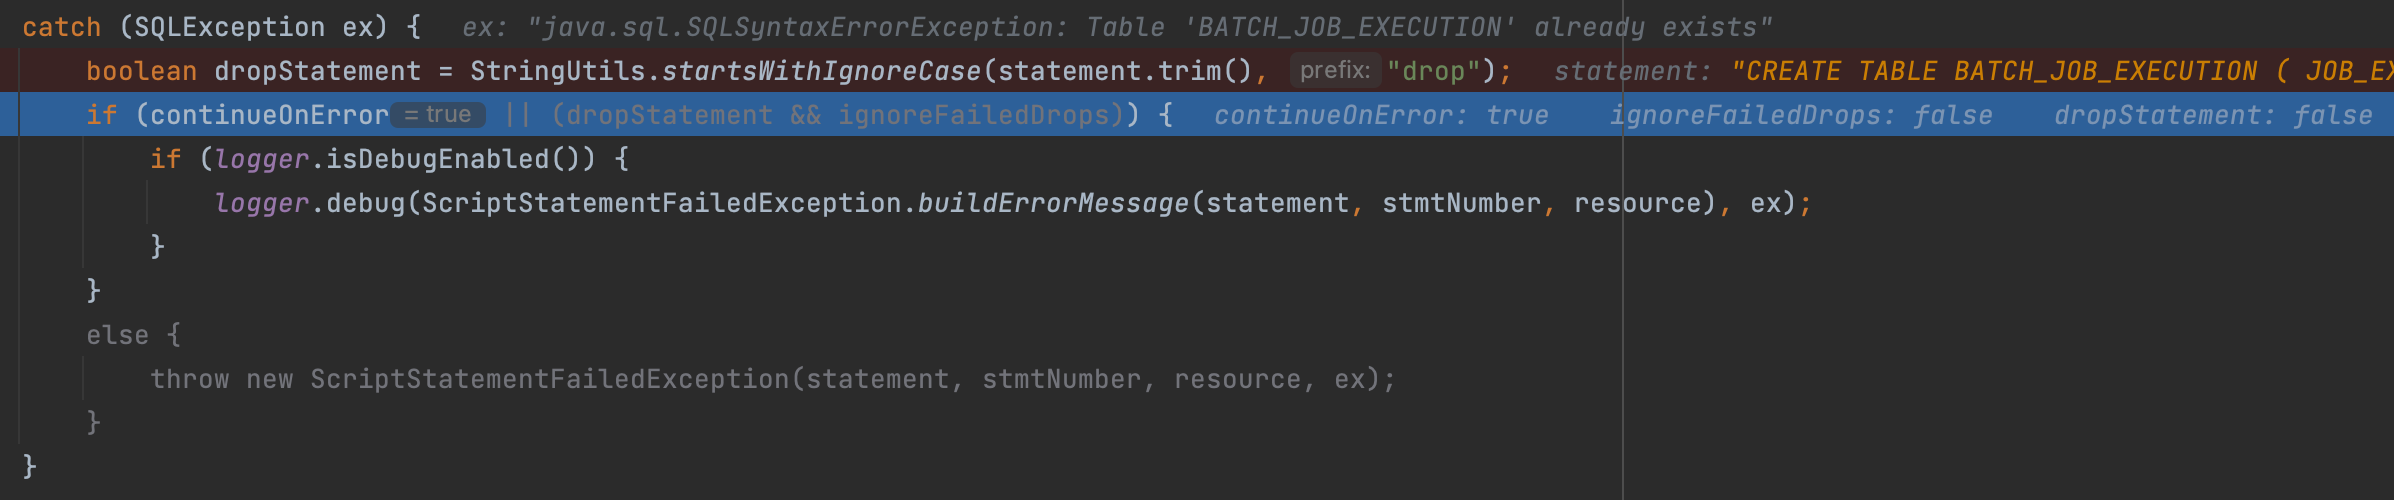 exception-catch-when-initializing-metadata-tables